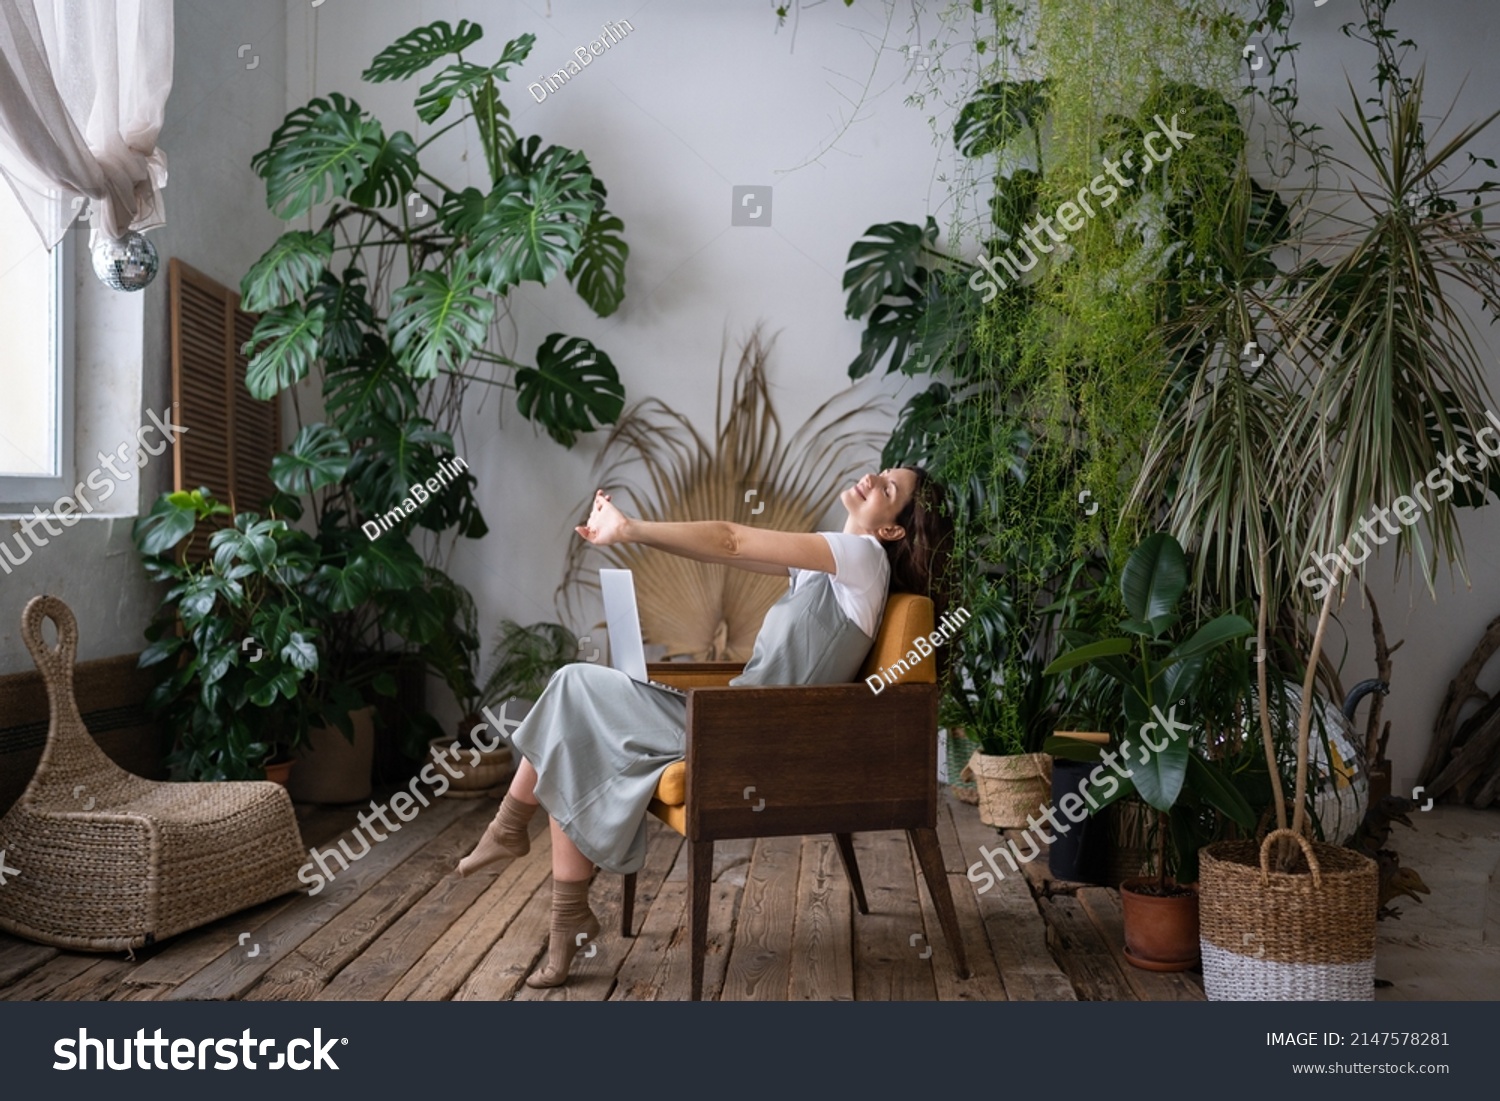 Overworked woman freelancer sitting on chair in cozy greenhouse, resting, stretching arms with closed eyes. Smiling tired woman in home garden taking break from online study. Plant lovers concept. #2147578281